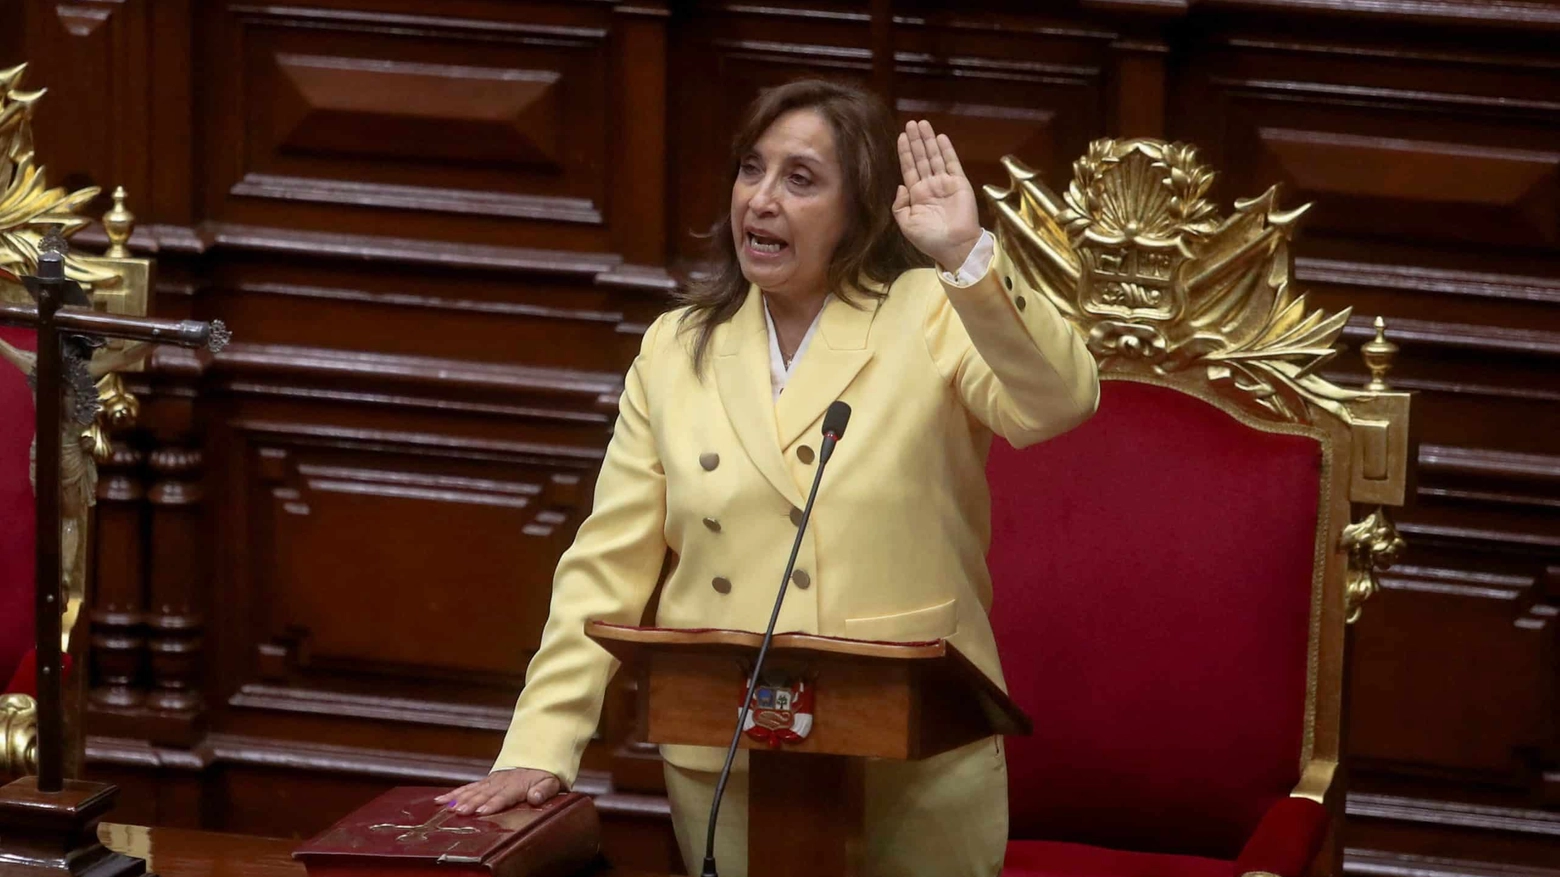 Peruvian Vice President Boluarte's swearing-in after Congress approved removal of President Castillo, in Lima